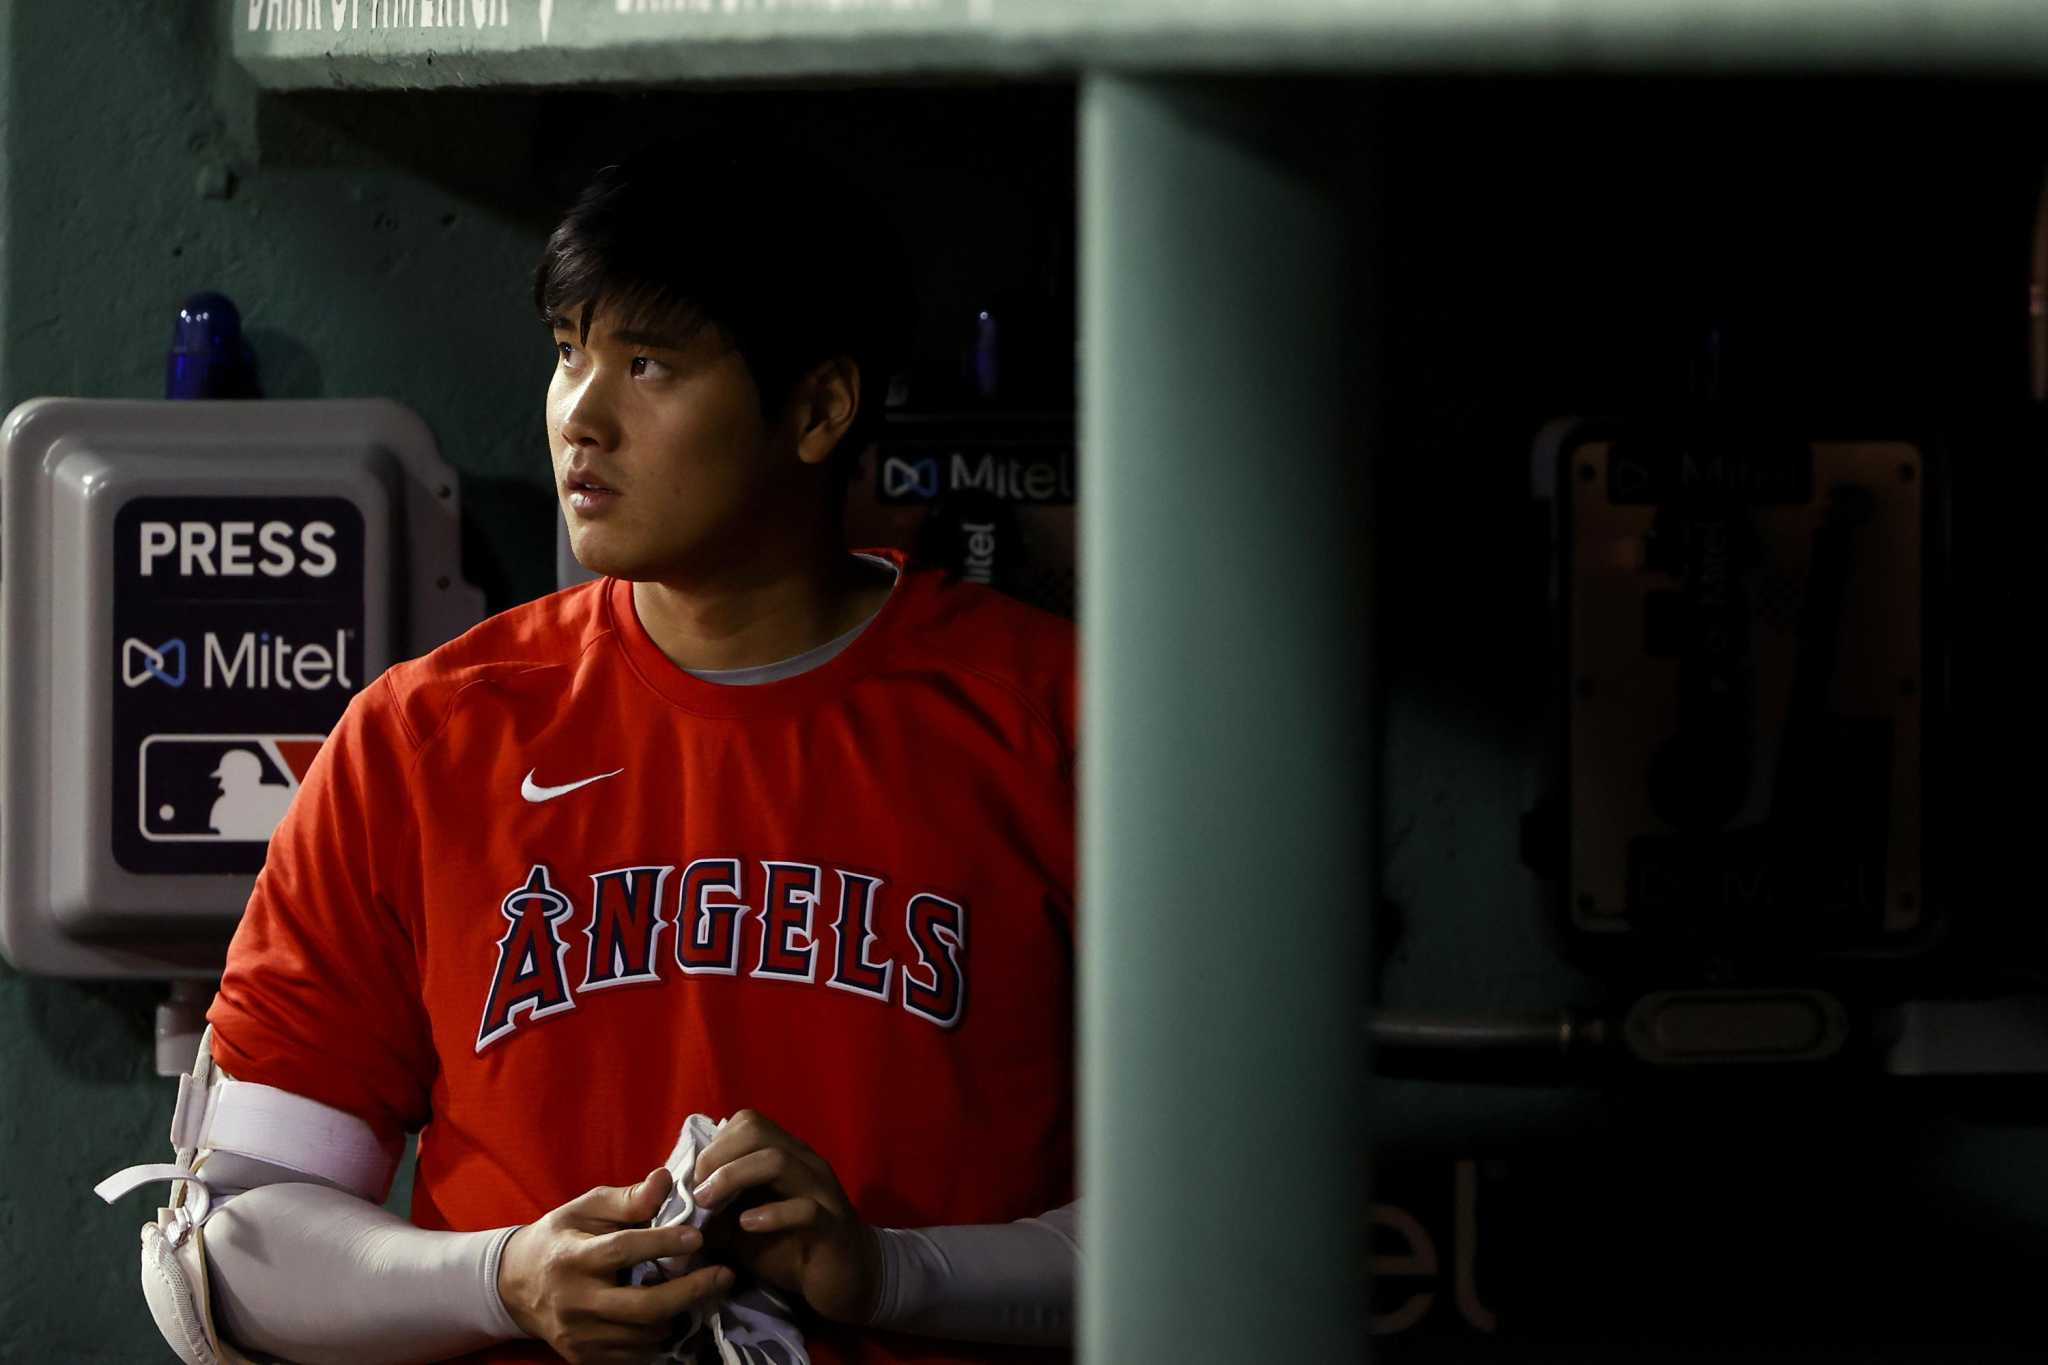 Shohei Ohtani won't pitch Tuesday at Fenway Park, but could still